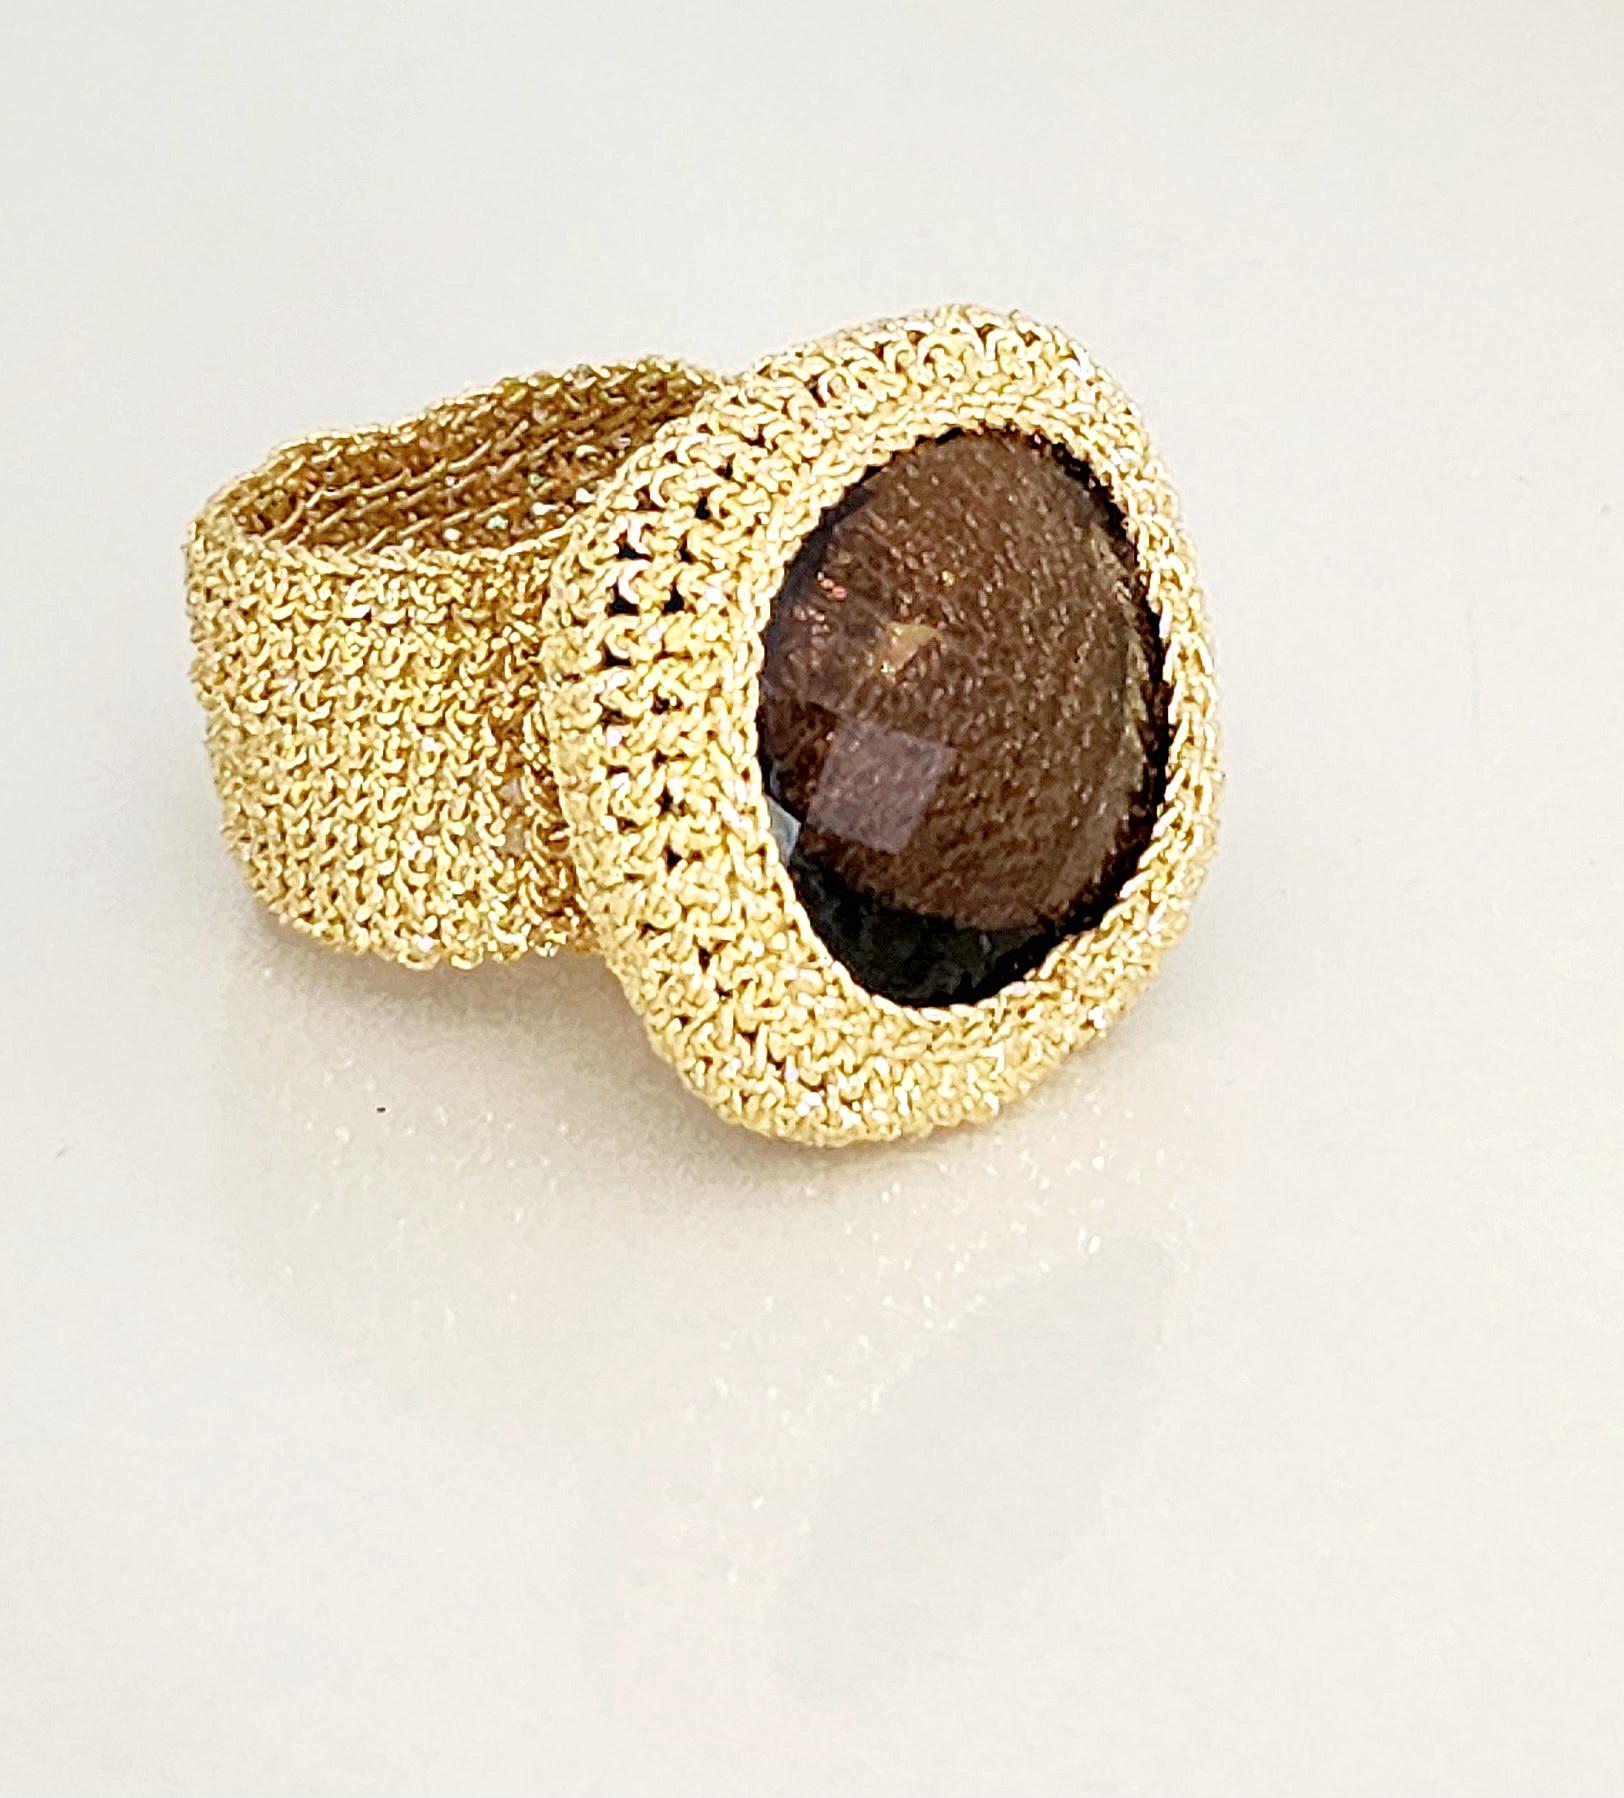 A one of a kind hand crochet ring. This beautiful ring is crochet with 18 karat gold thread. The thread is made from an 18 karat gold wire, flattened and wrapped around a cotton core. The stone is a lovely 25mmx25mm Smokey Quartz. 
Smokey Quartz is